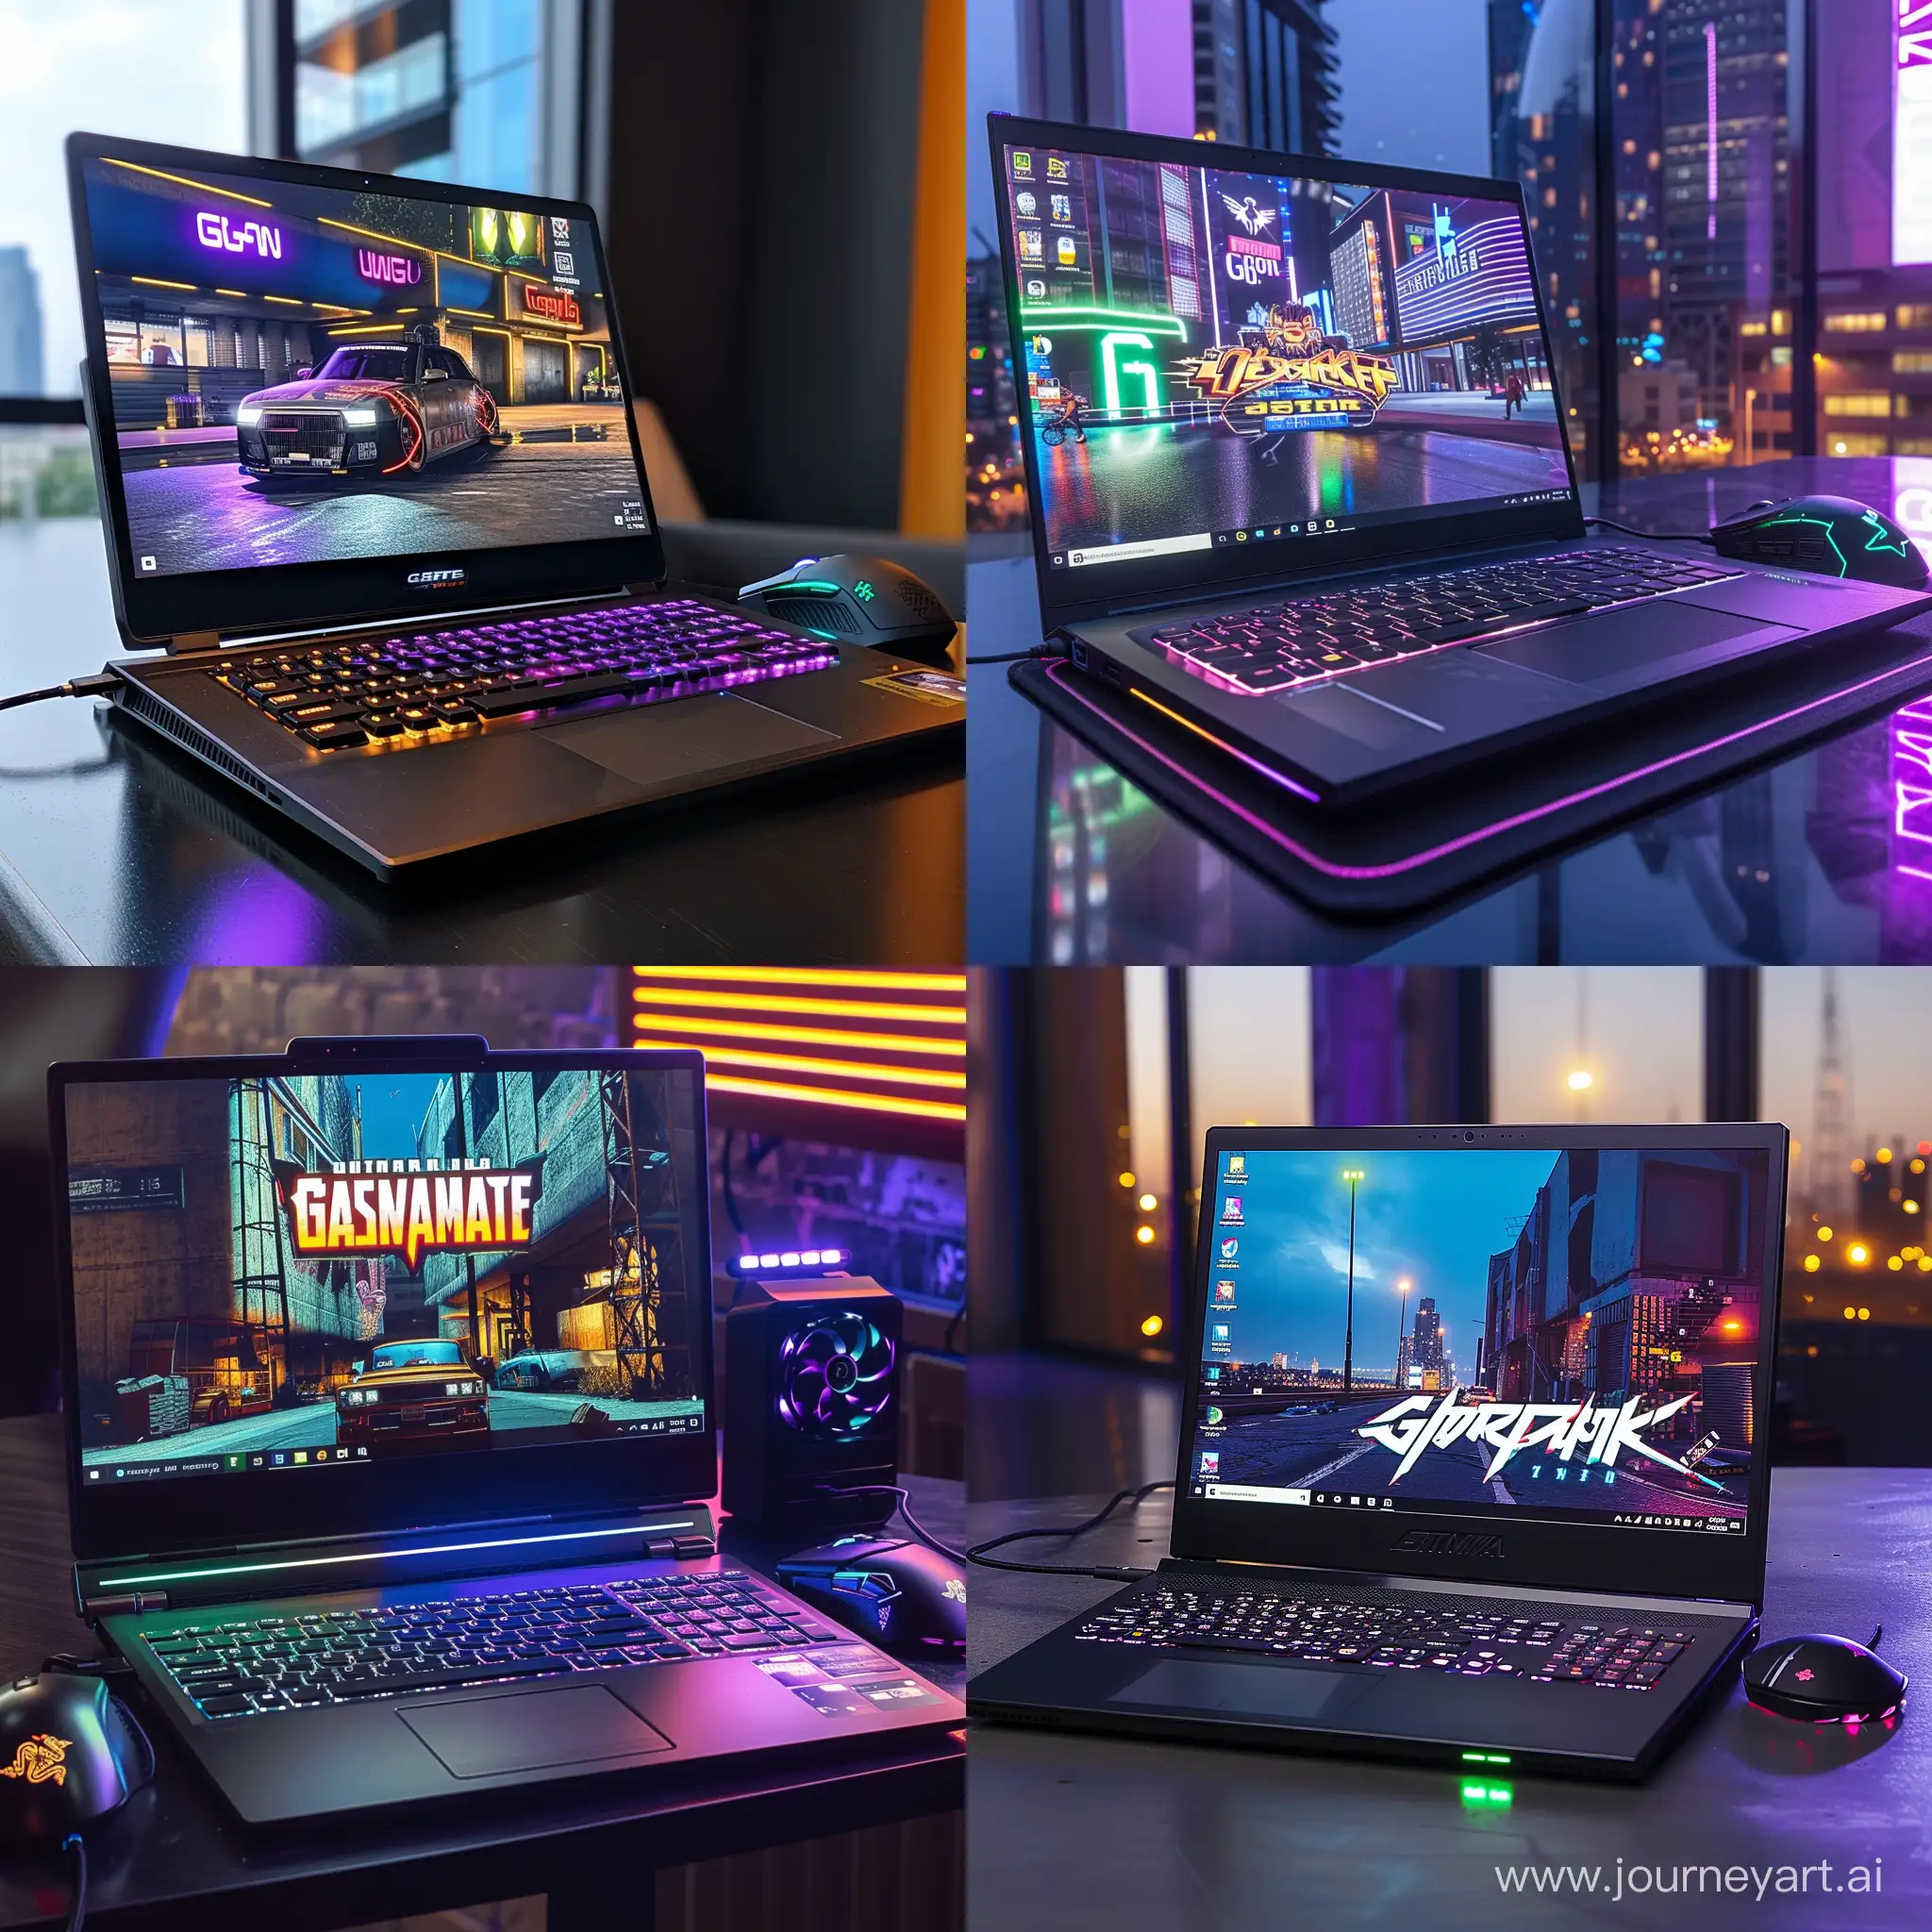 A very powerful laptop with a built-in mechanical keyboard, a mouse with a cyberpunk style on the table, and on the laptop screen gta 6